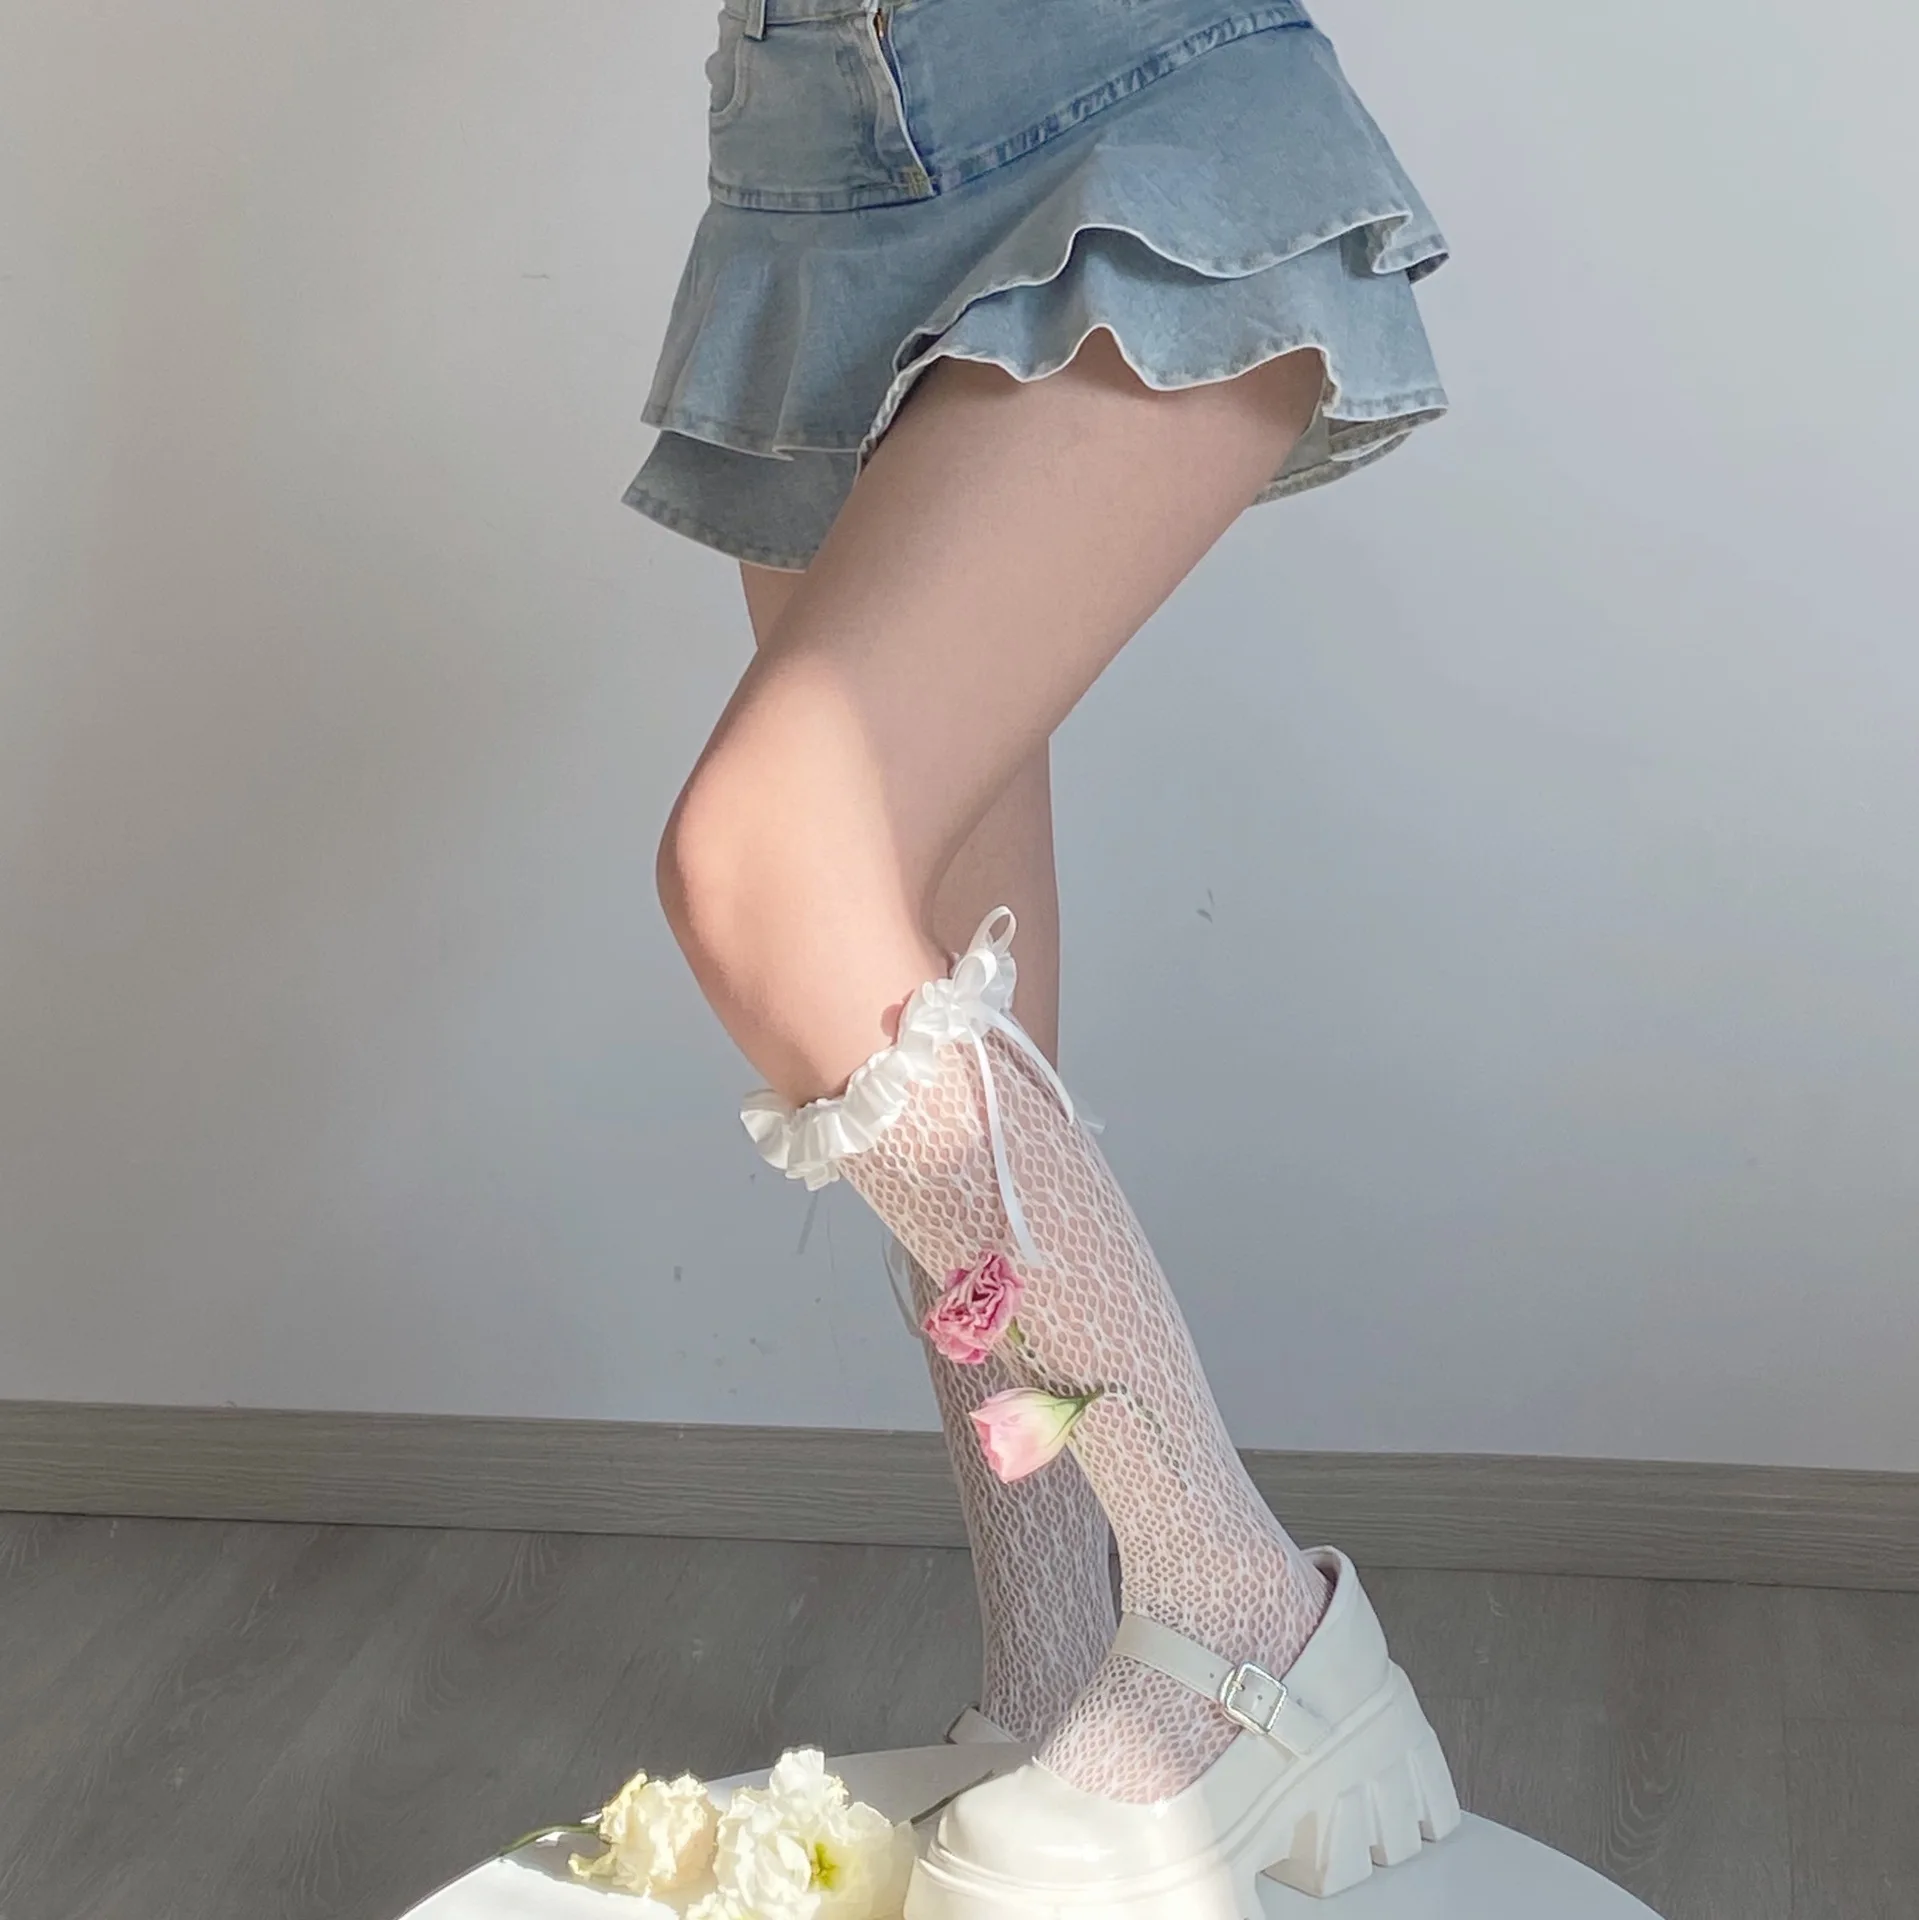 

Summer New French Pastoral Pleated Lace Bow Knot Hollowed-out Lace Fishnet Stockings Middle Tube Calf Socks Sexy Woman Socks Hot